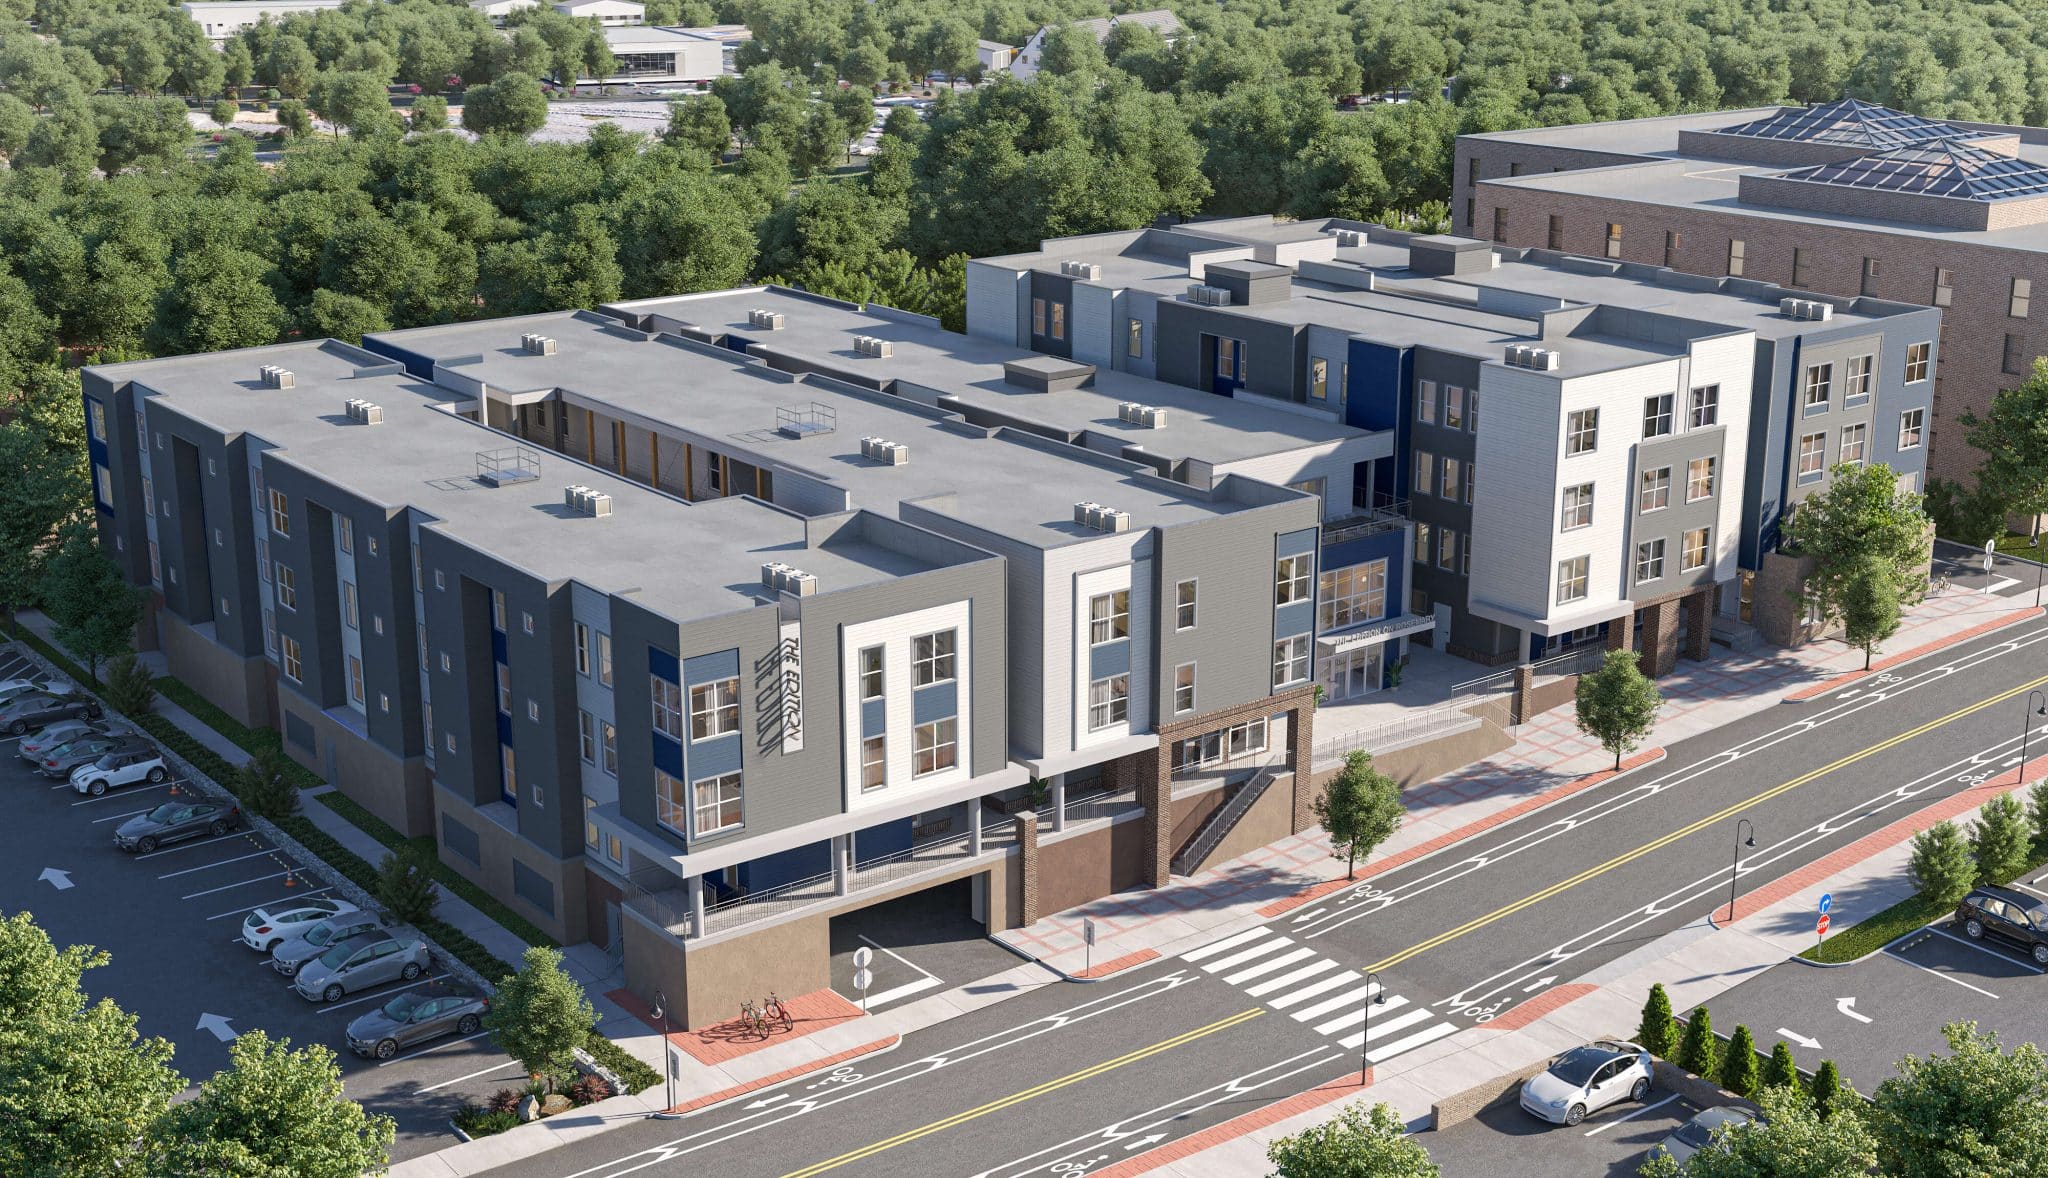 the edition on rosemary brand new boutique apartments near unc chapel hill located on west rosemary street birds eye view of community exterior